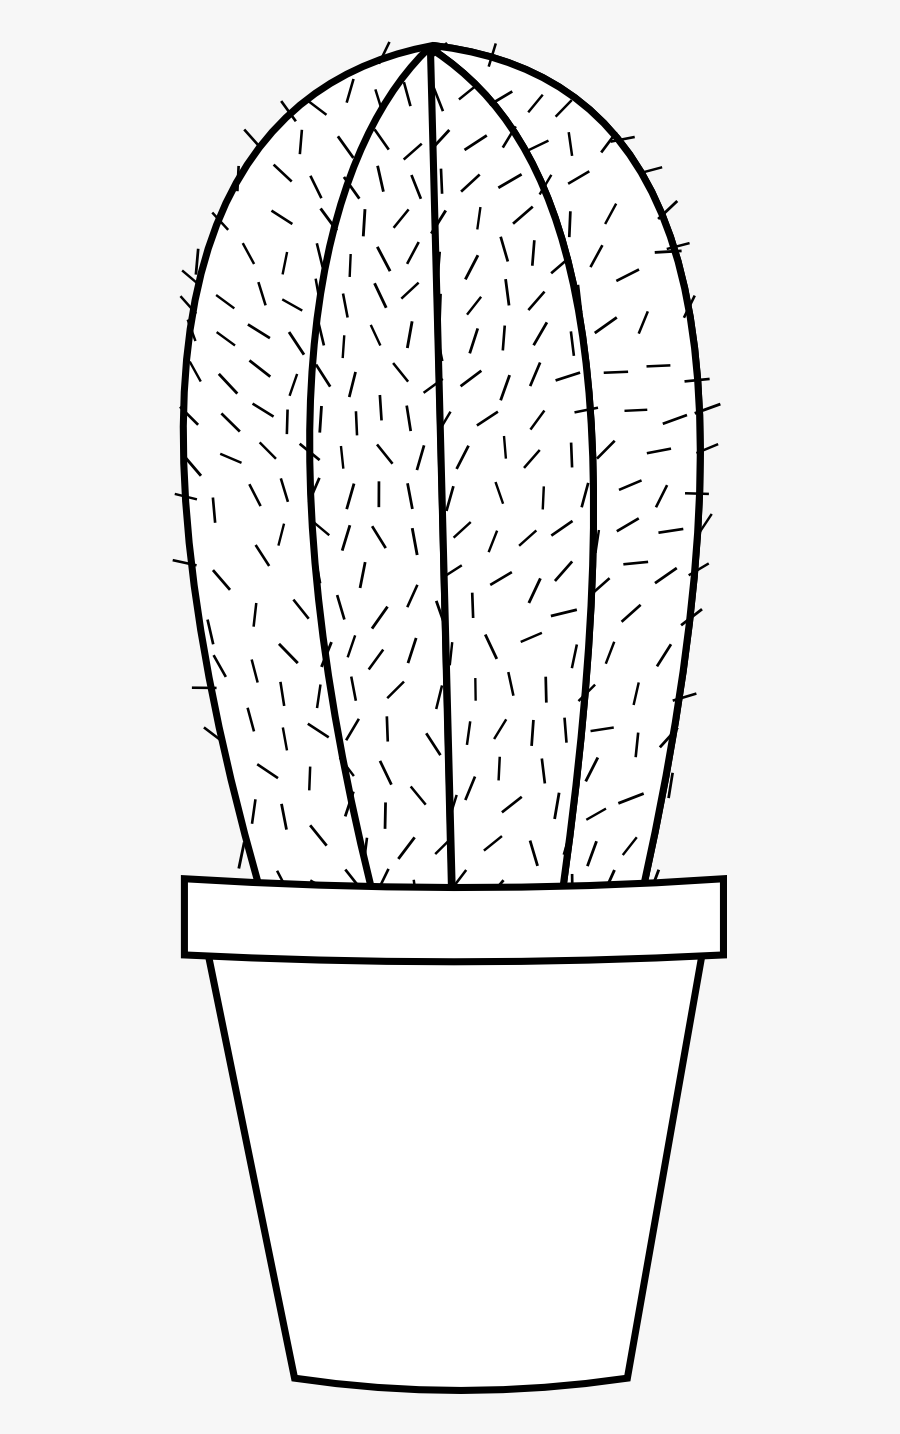 Cactus Clipart Black And - Cactus Clipart Black And White Free is a free tr...